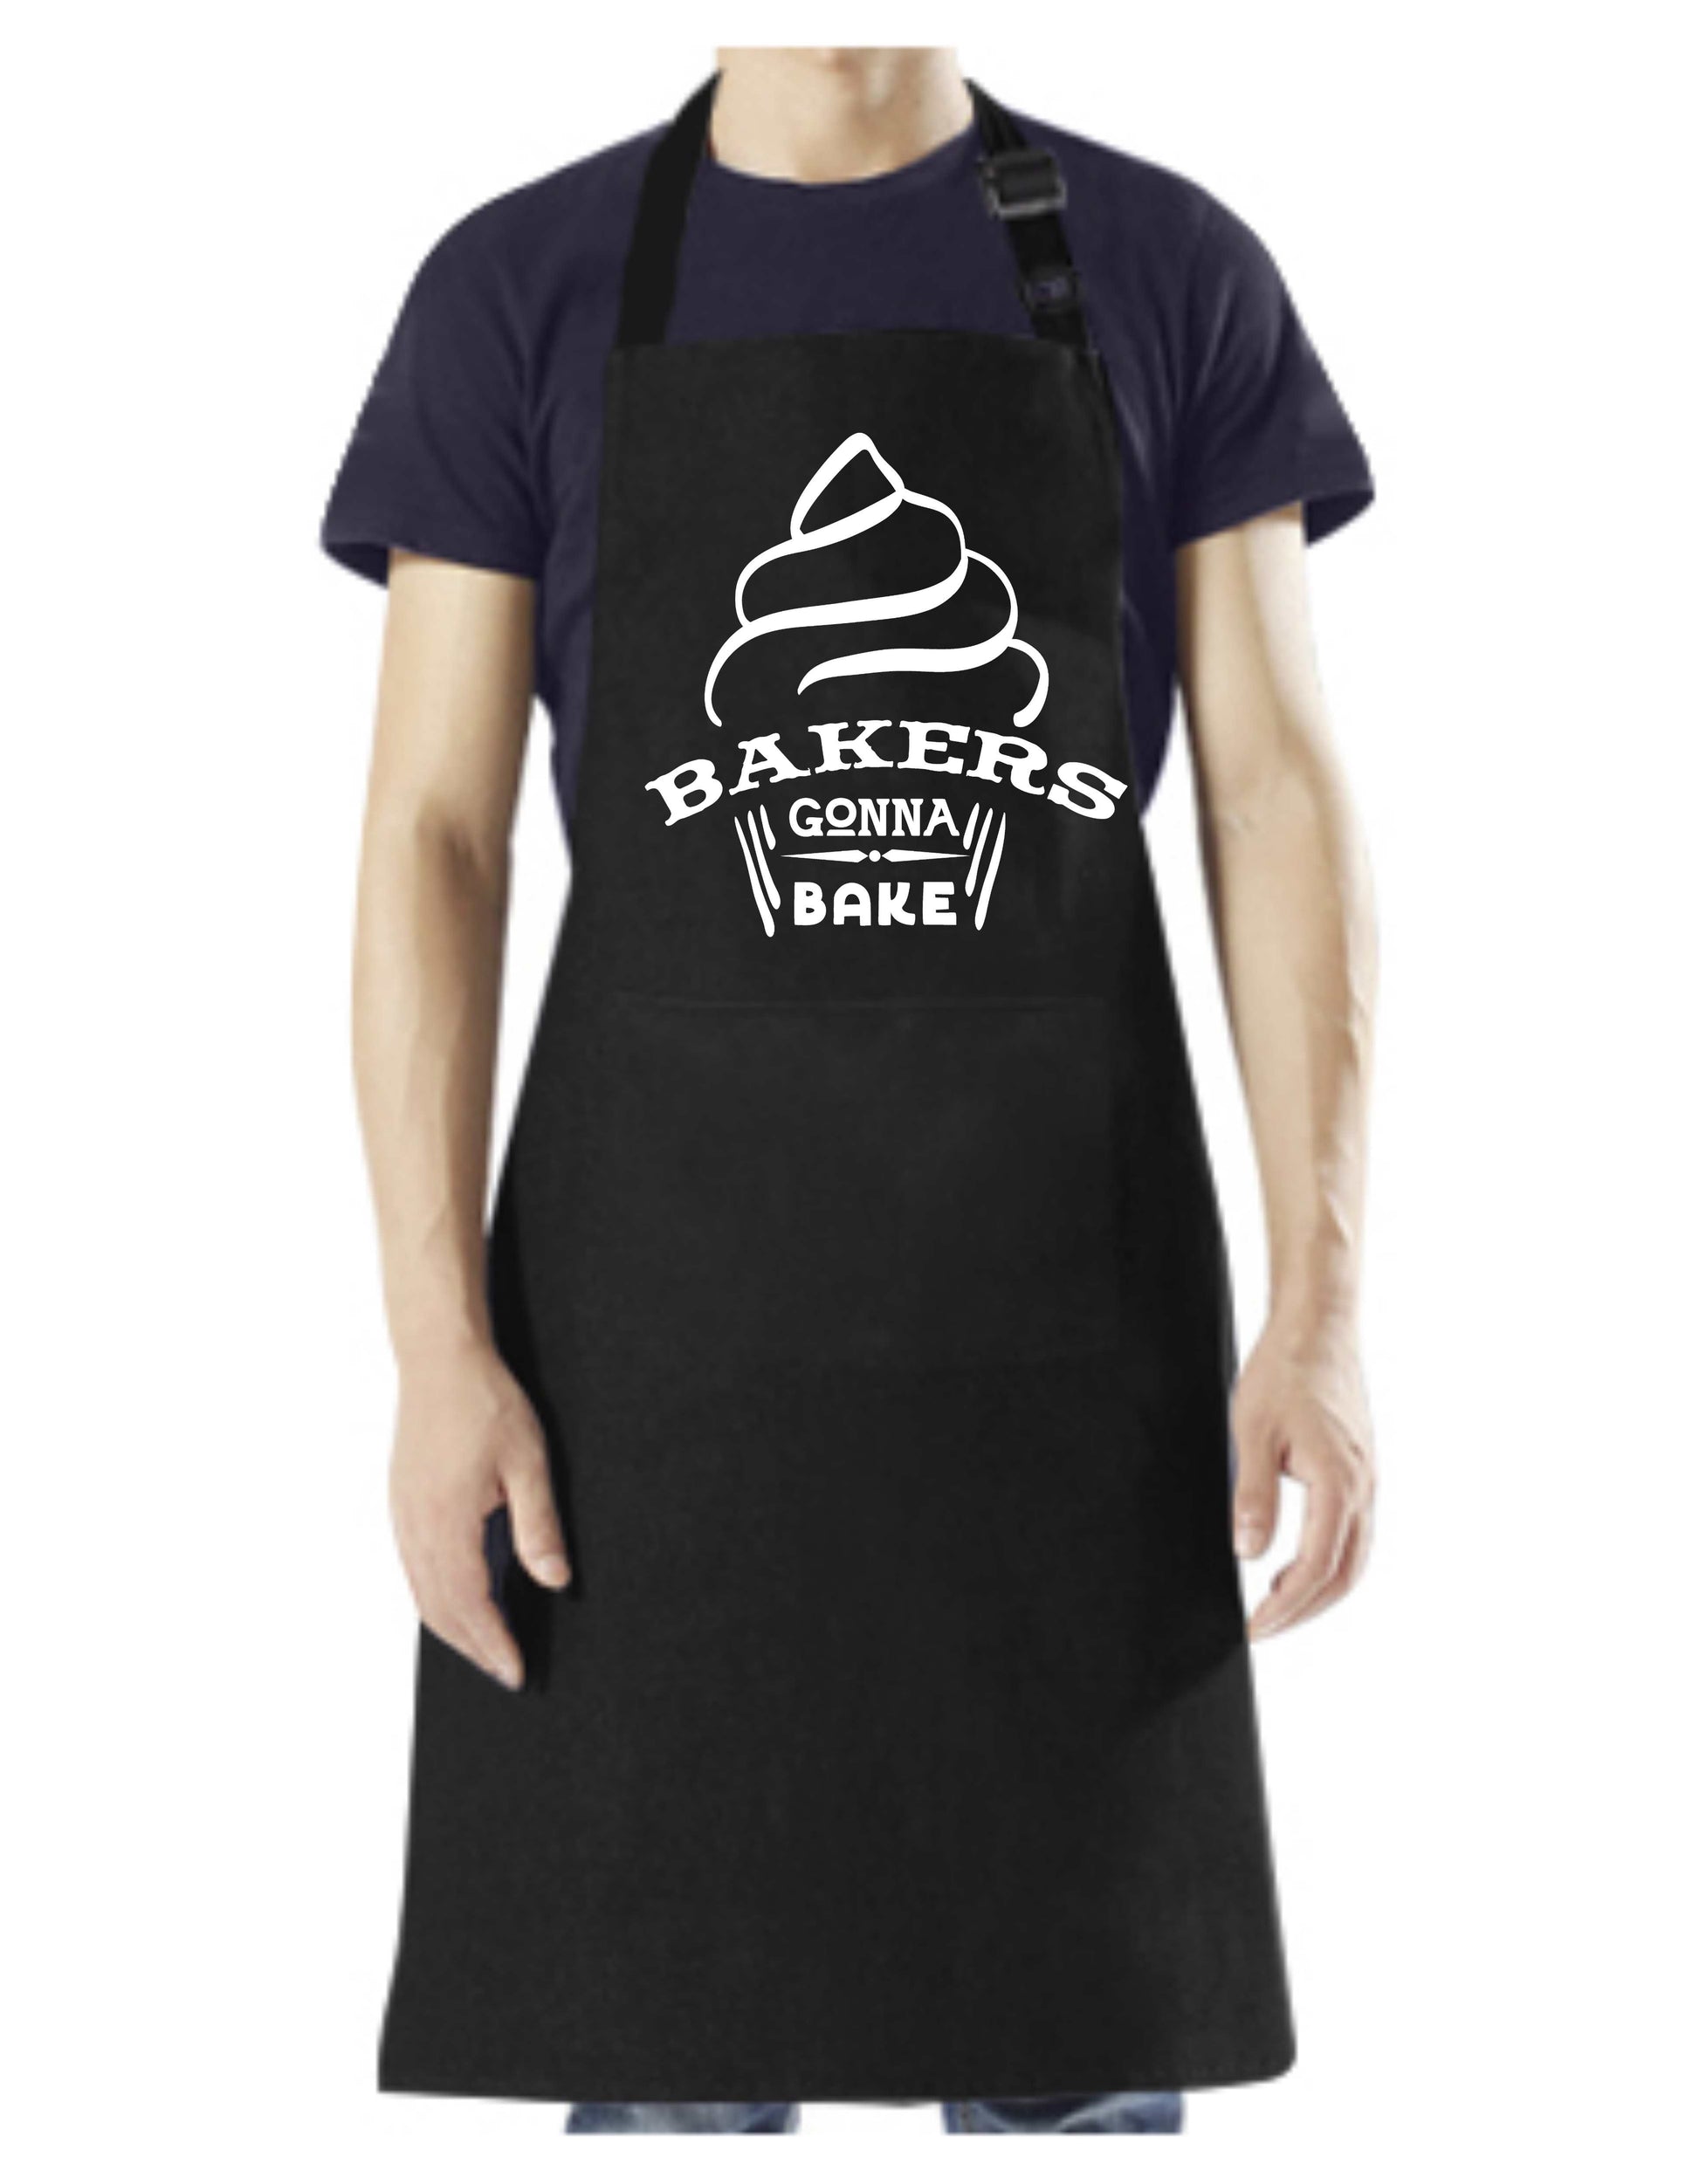 Bakers Gonna Bake - Apron with Adjustable Neck and pockets - Mister Snarky's